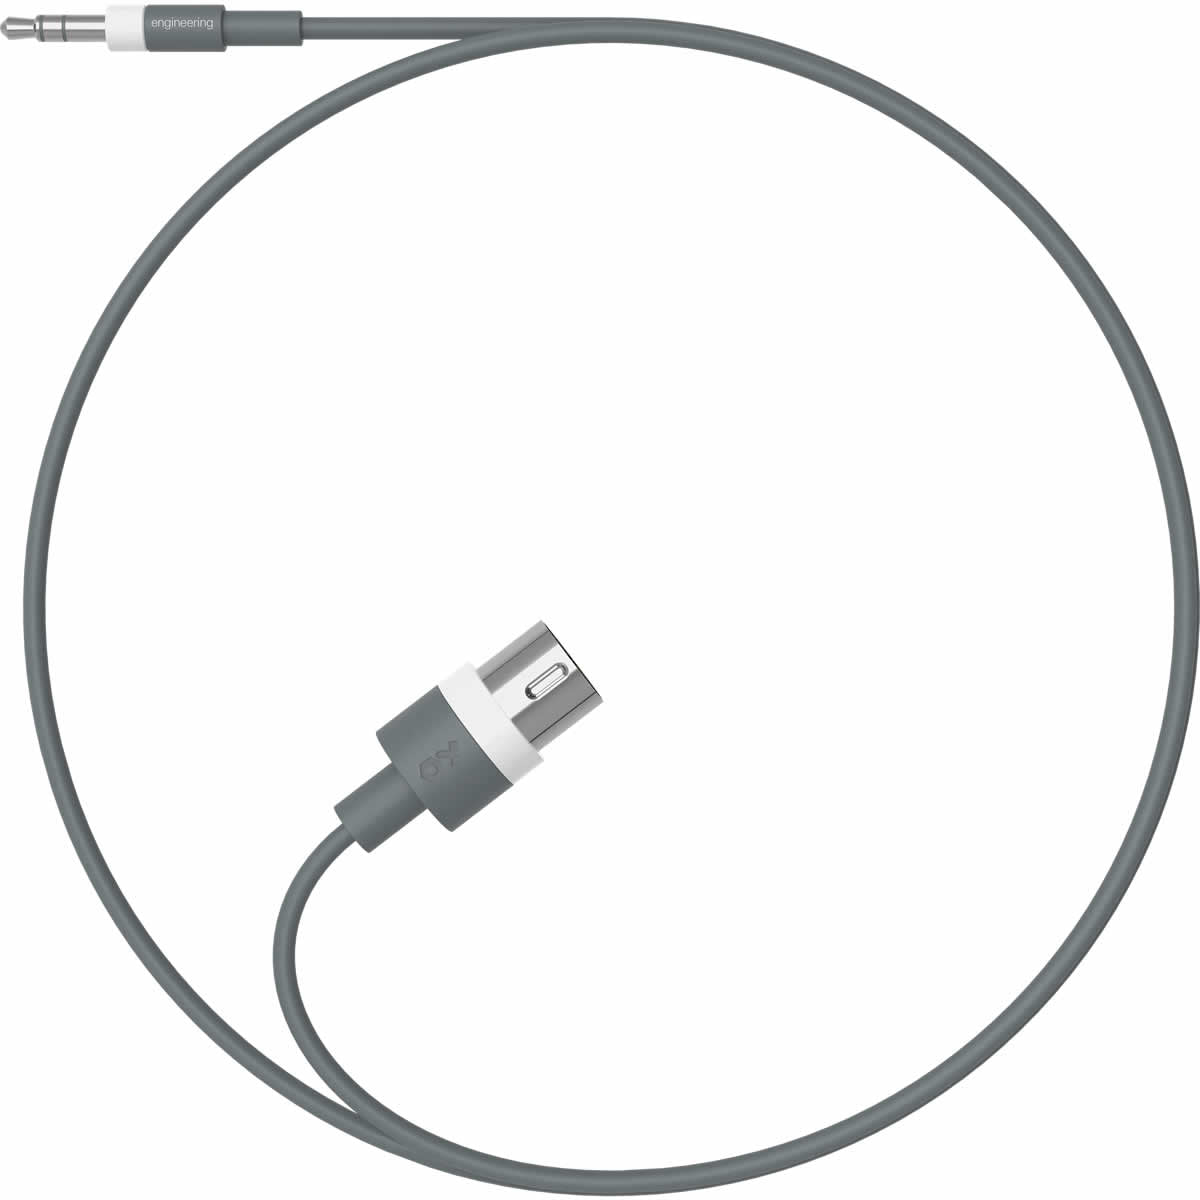 Main image of Teenage Engineering 3.5 mm to 5-pin MIDI Cable - 750 mm